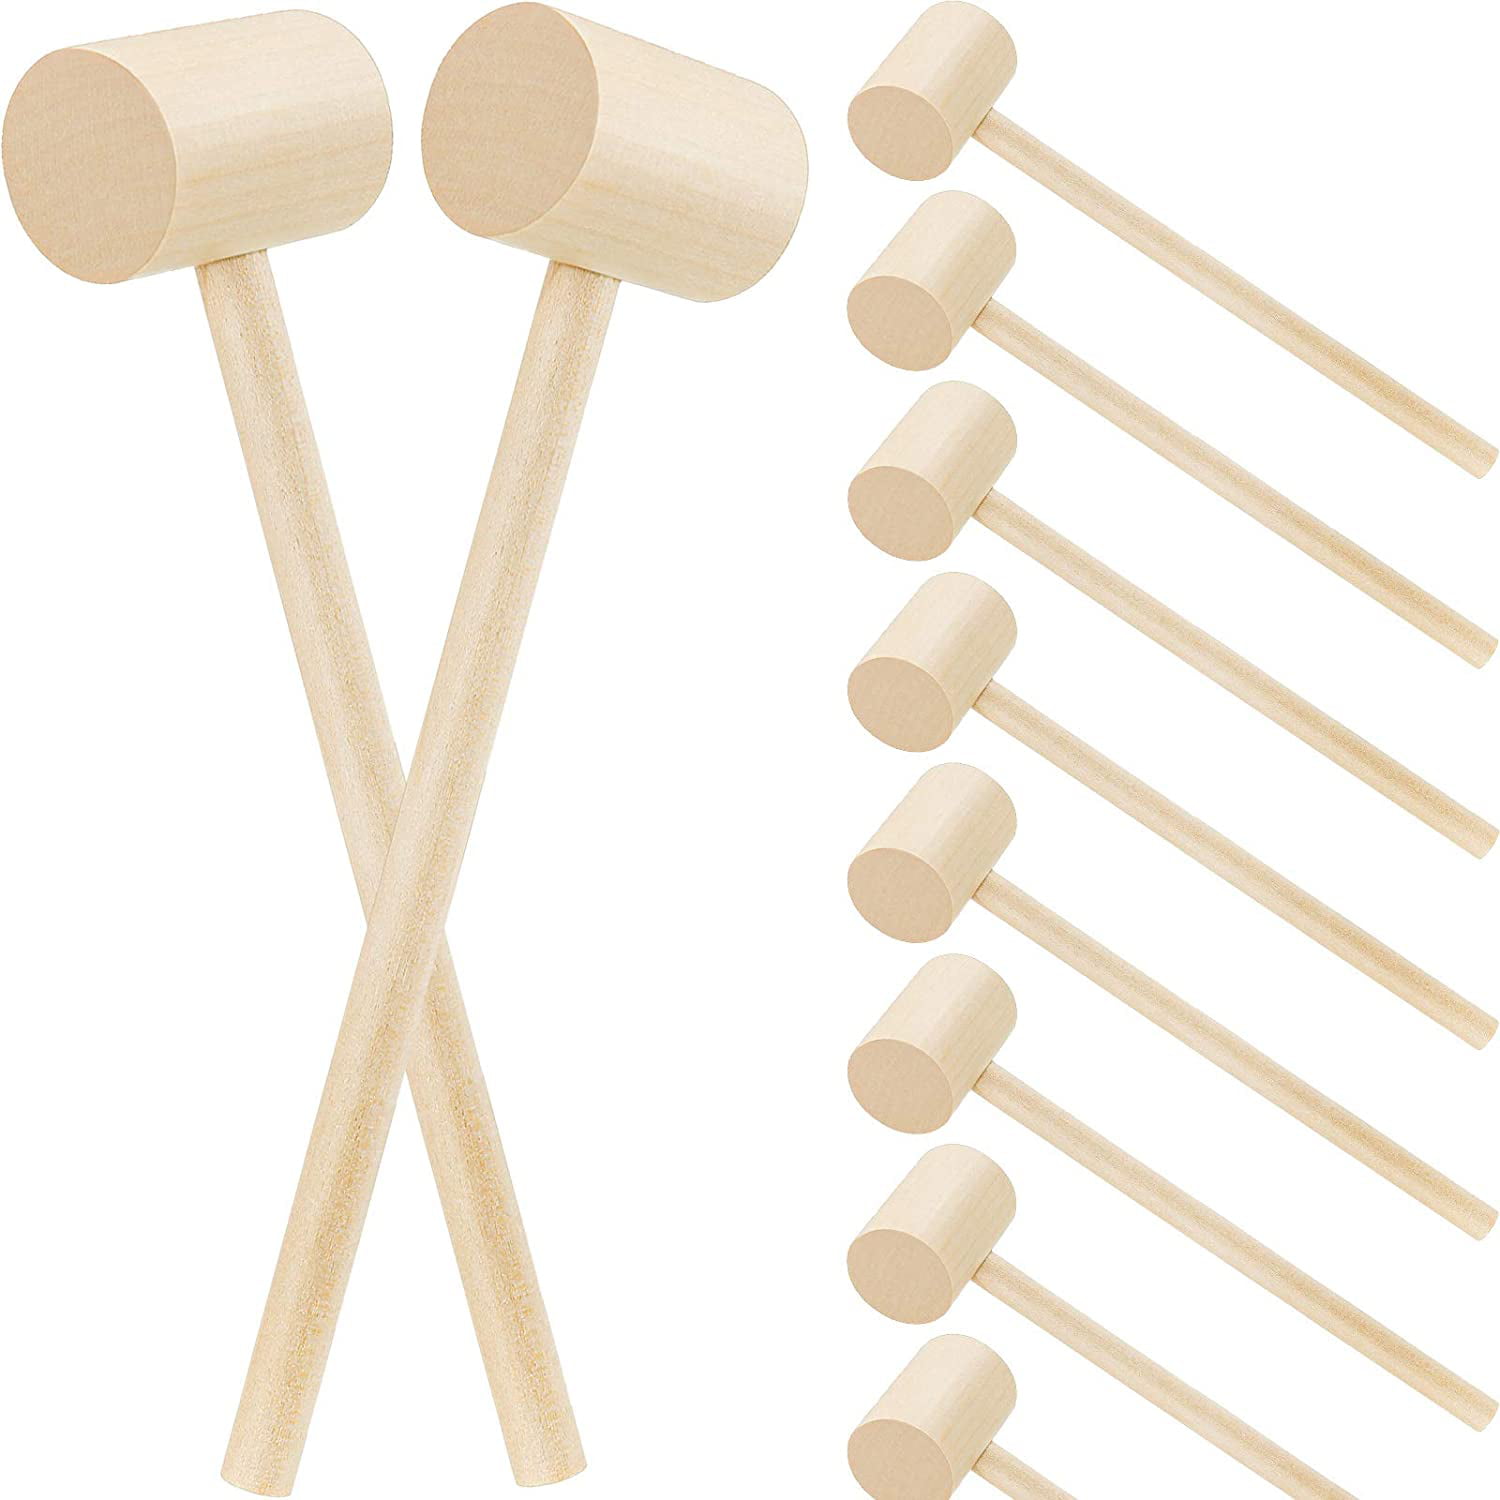 Toyvian 5pcs Wooden Crab Mallets Crab Hammers Mini Lobster Seafood Crackers Educational Toy for Kids Children 